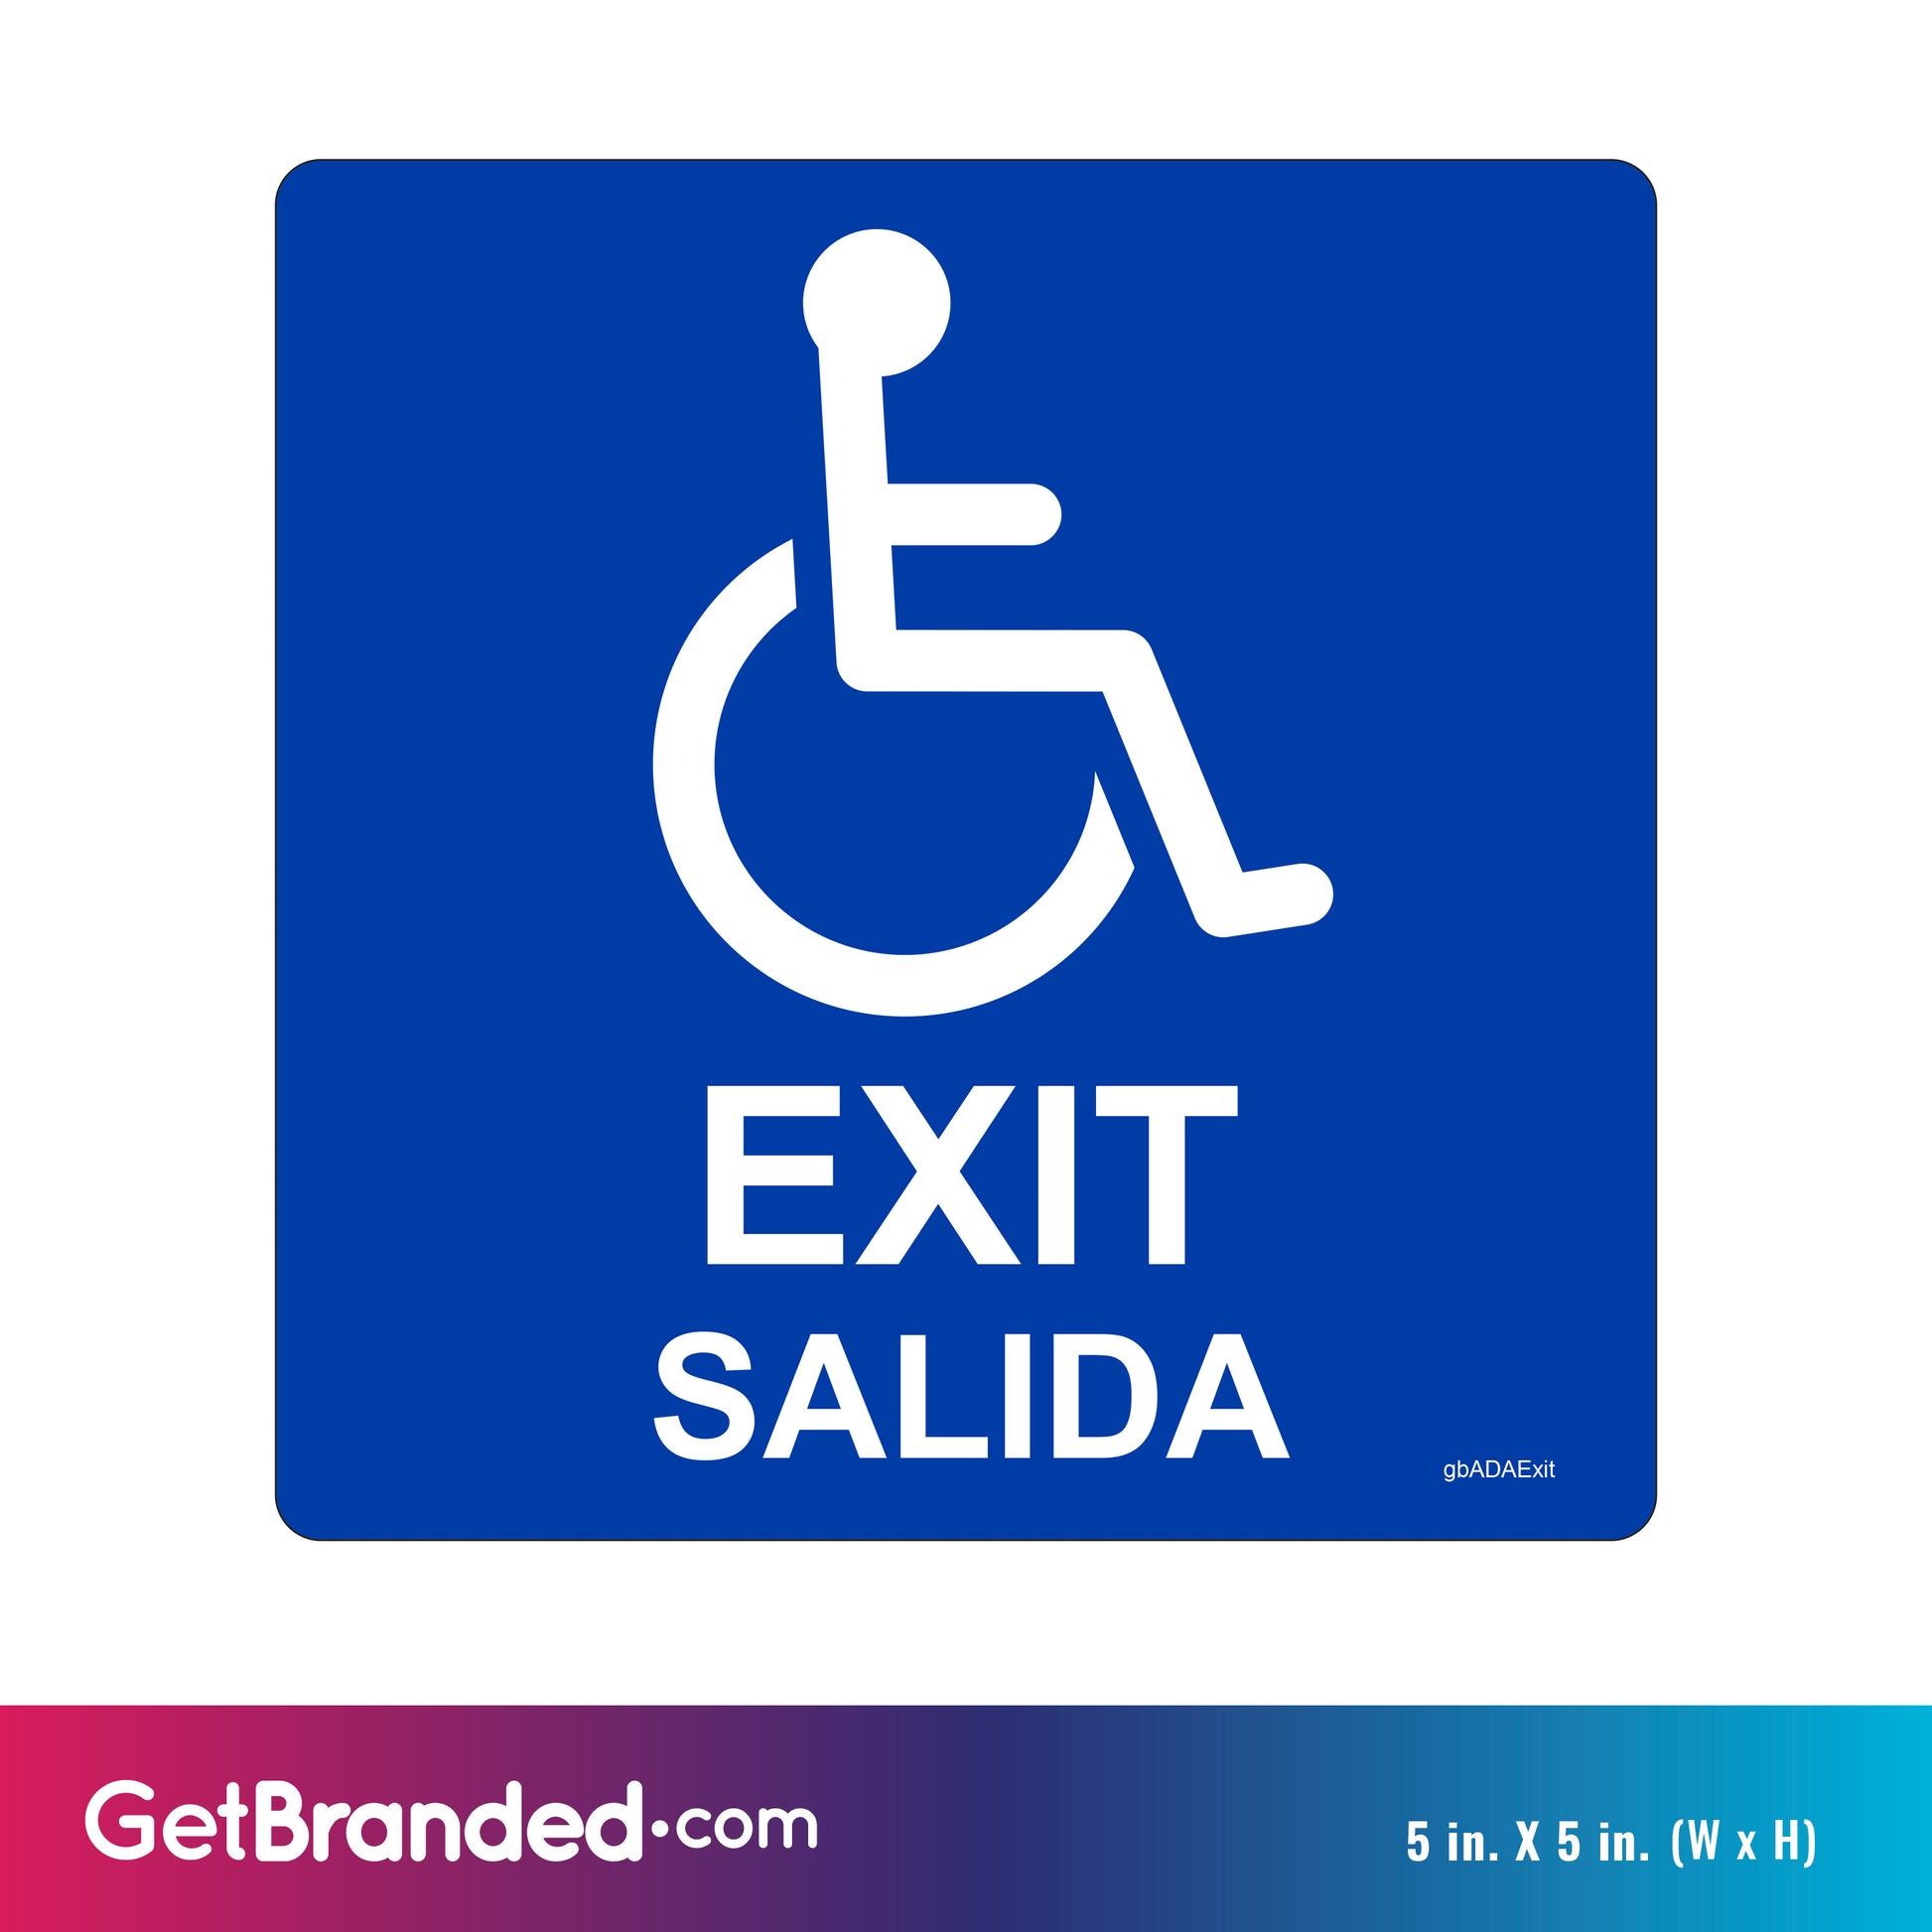 ADA Exit Decal size guide.